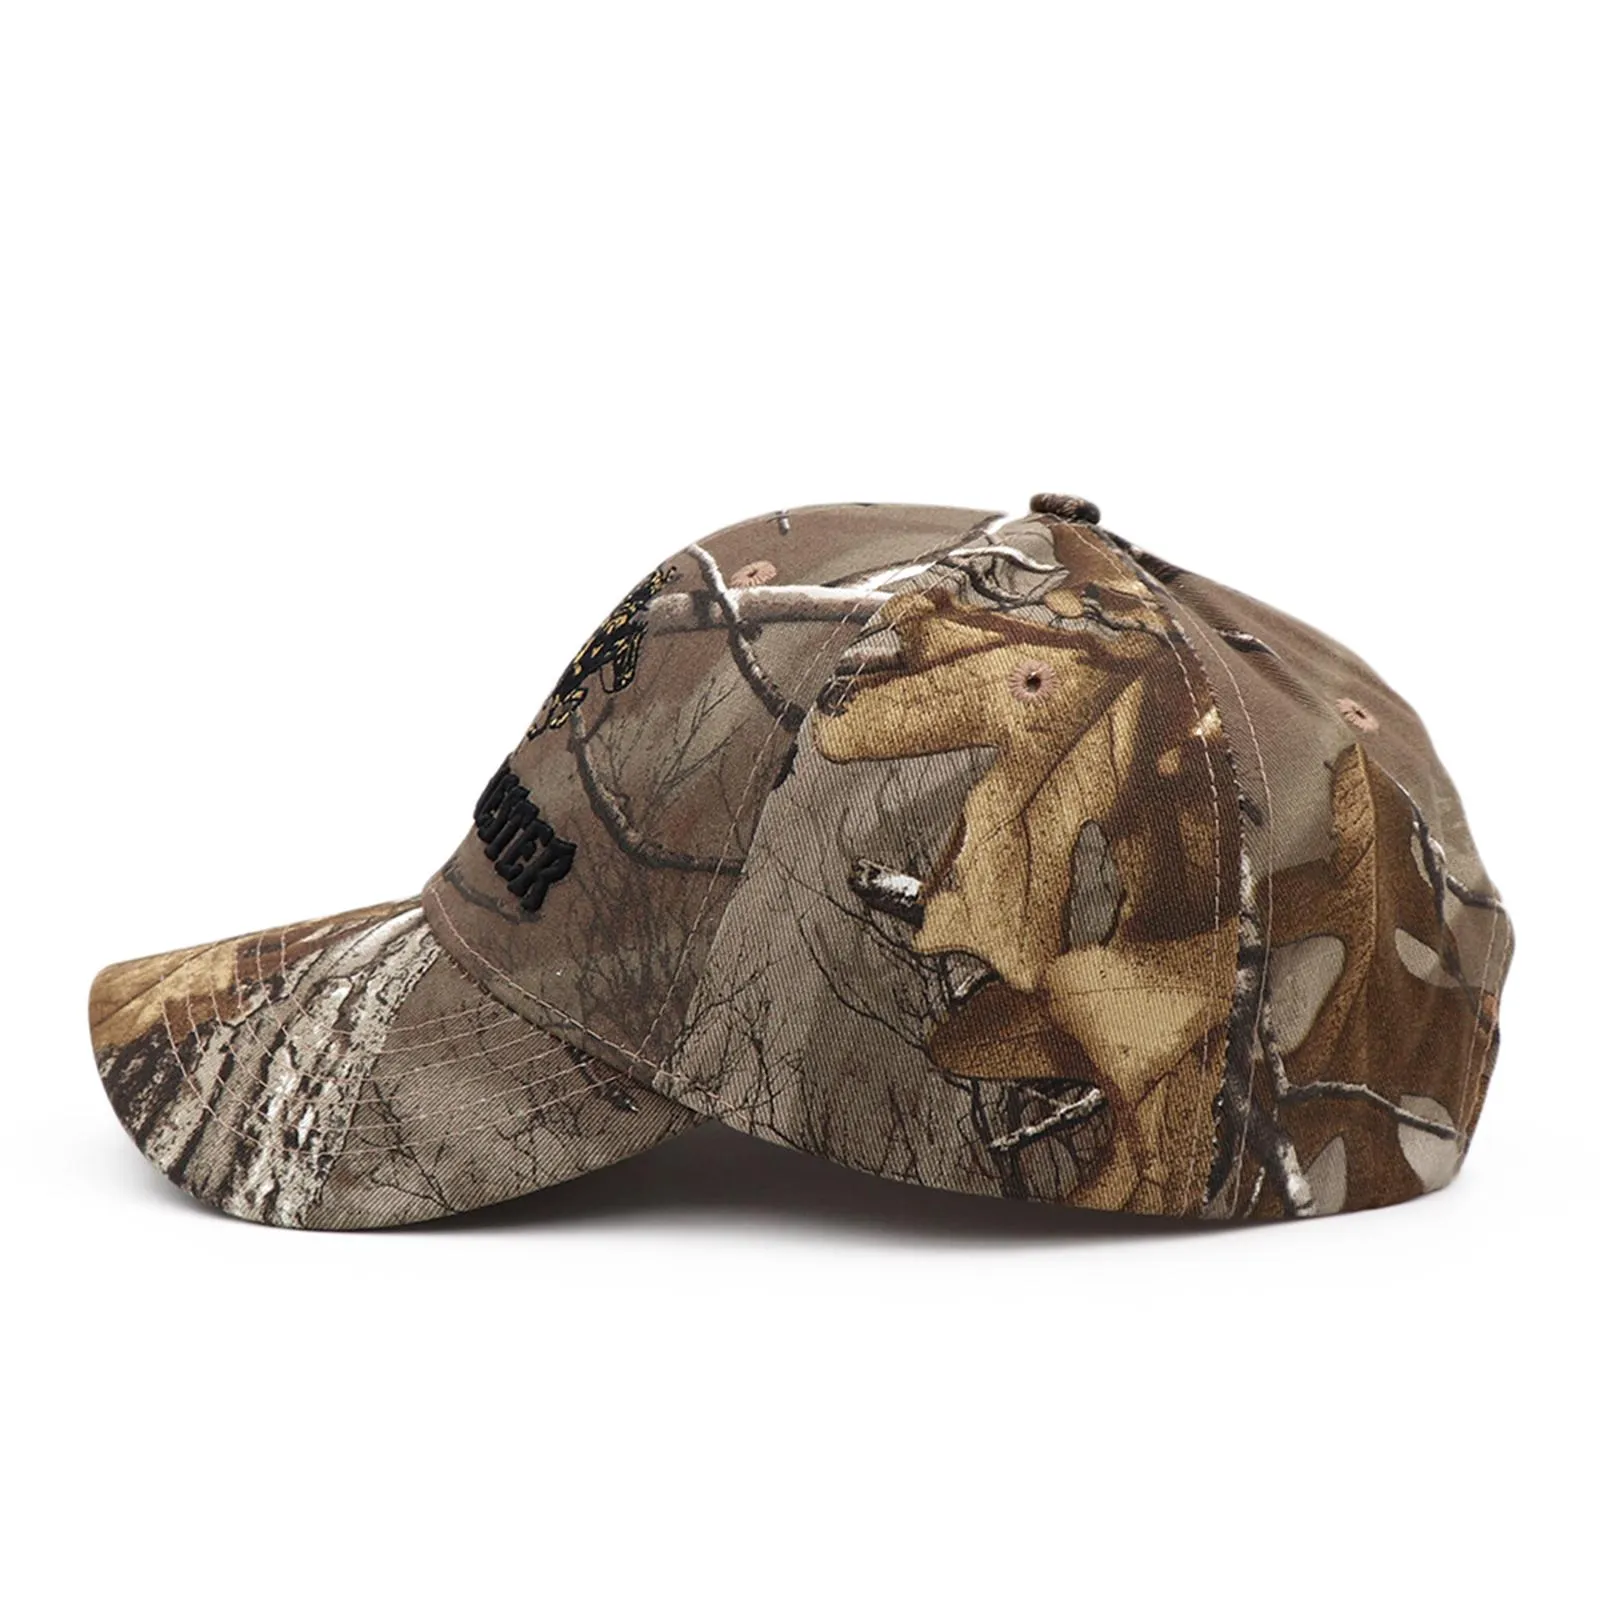 New 2021 Tactical Winchester Shooting Sports CAMO Baseball Cap Fishing Caps  Men Outdoor Hunting Jungle Hat Hiking Casquette Hats252736345 From 13,99 €